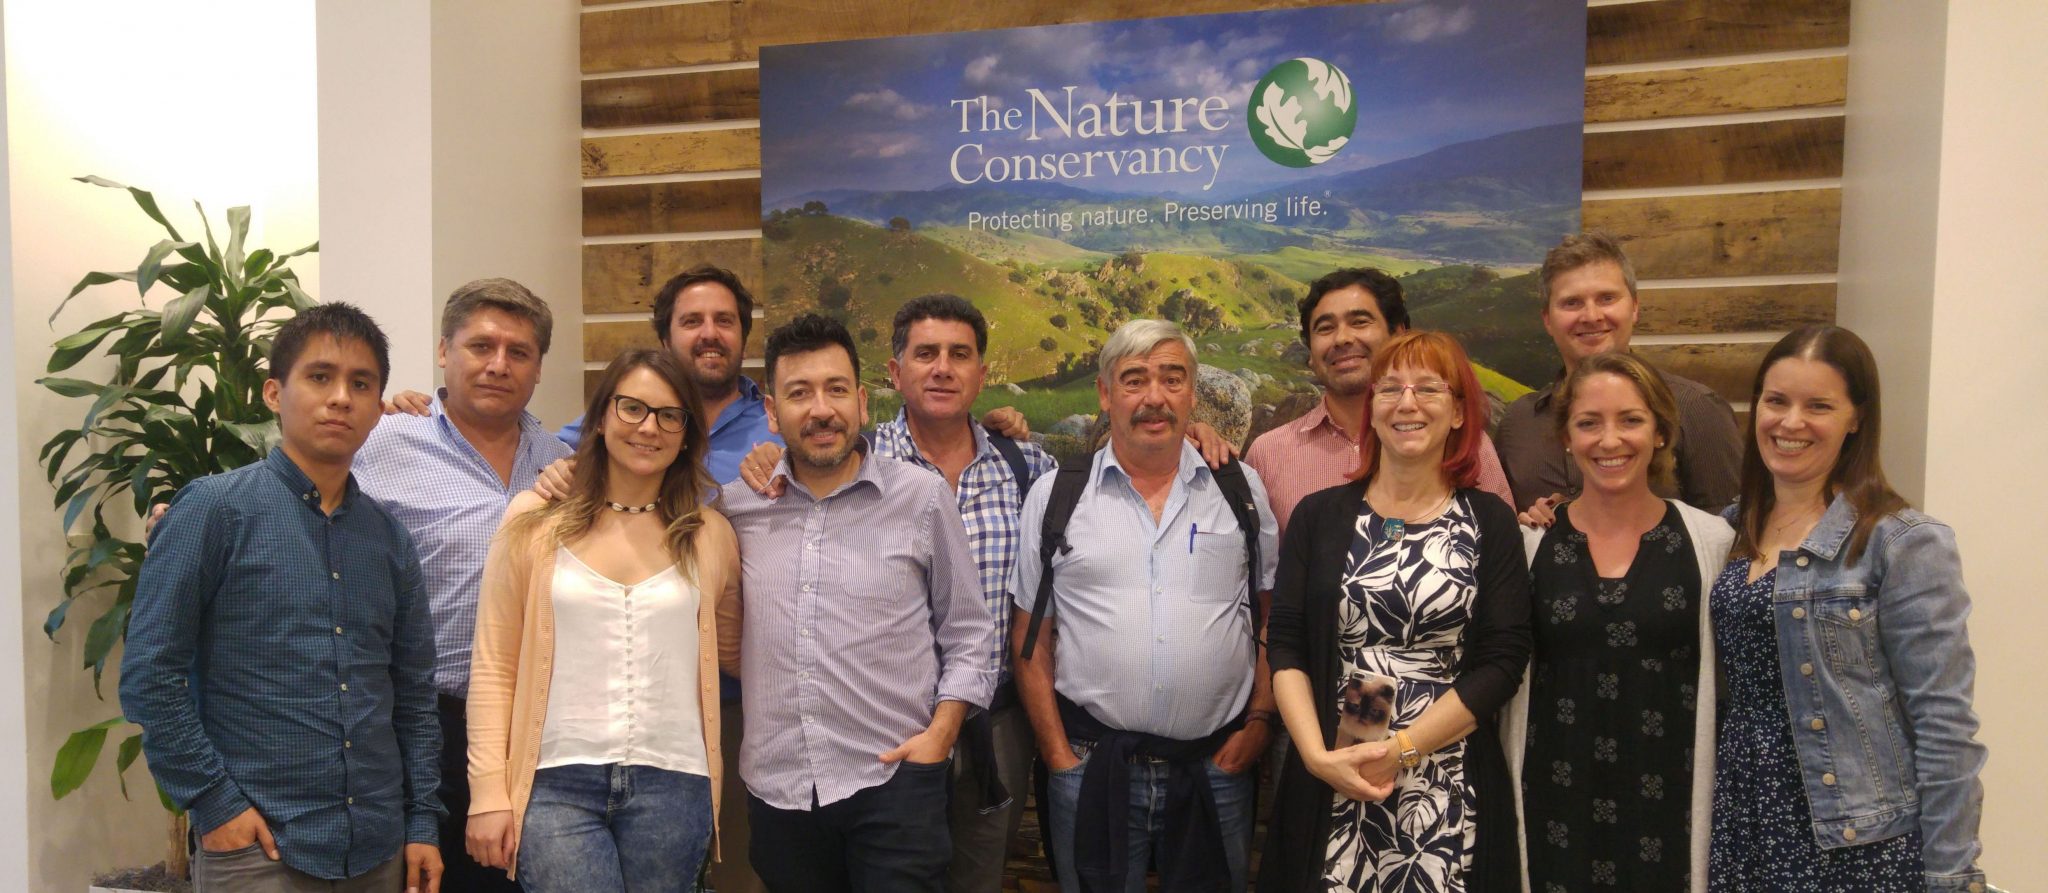 IFOP researchers are refined in the United States with the support of the NGO The Nature Conservancy